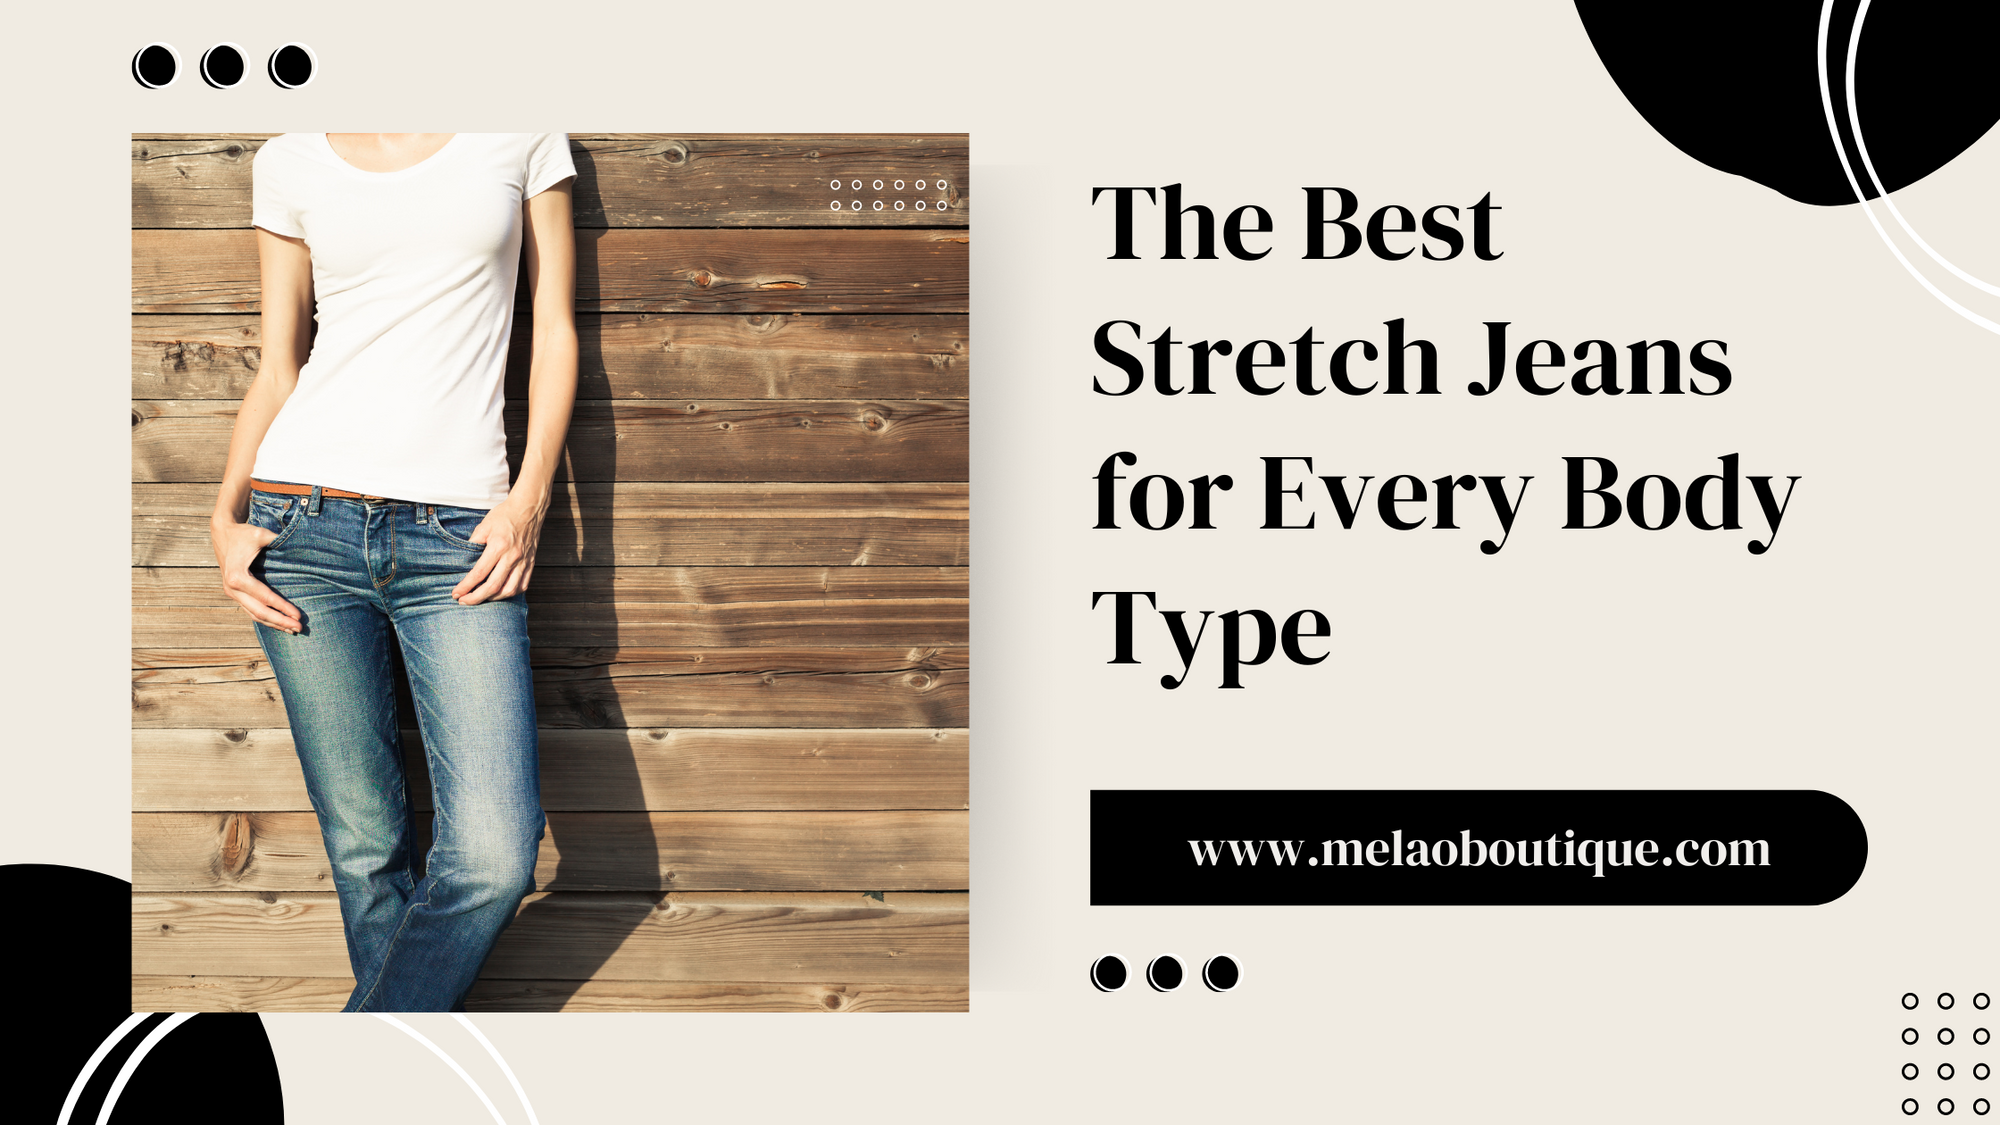 The Best Stretch Jeans for Every Body Type